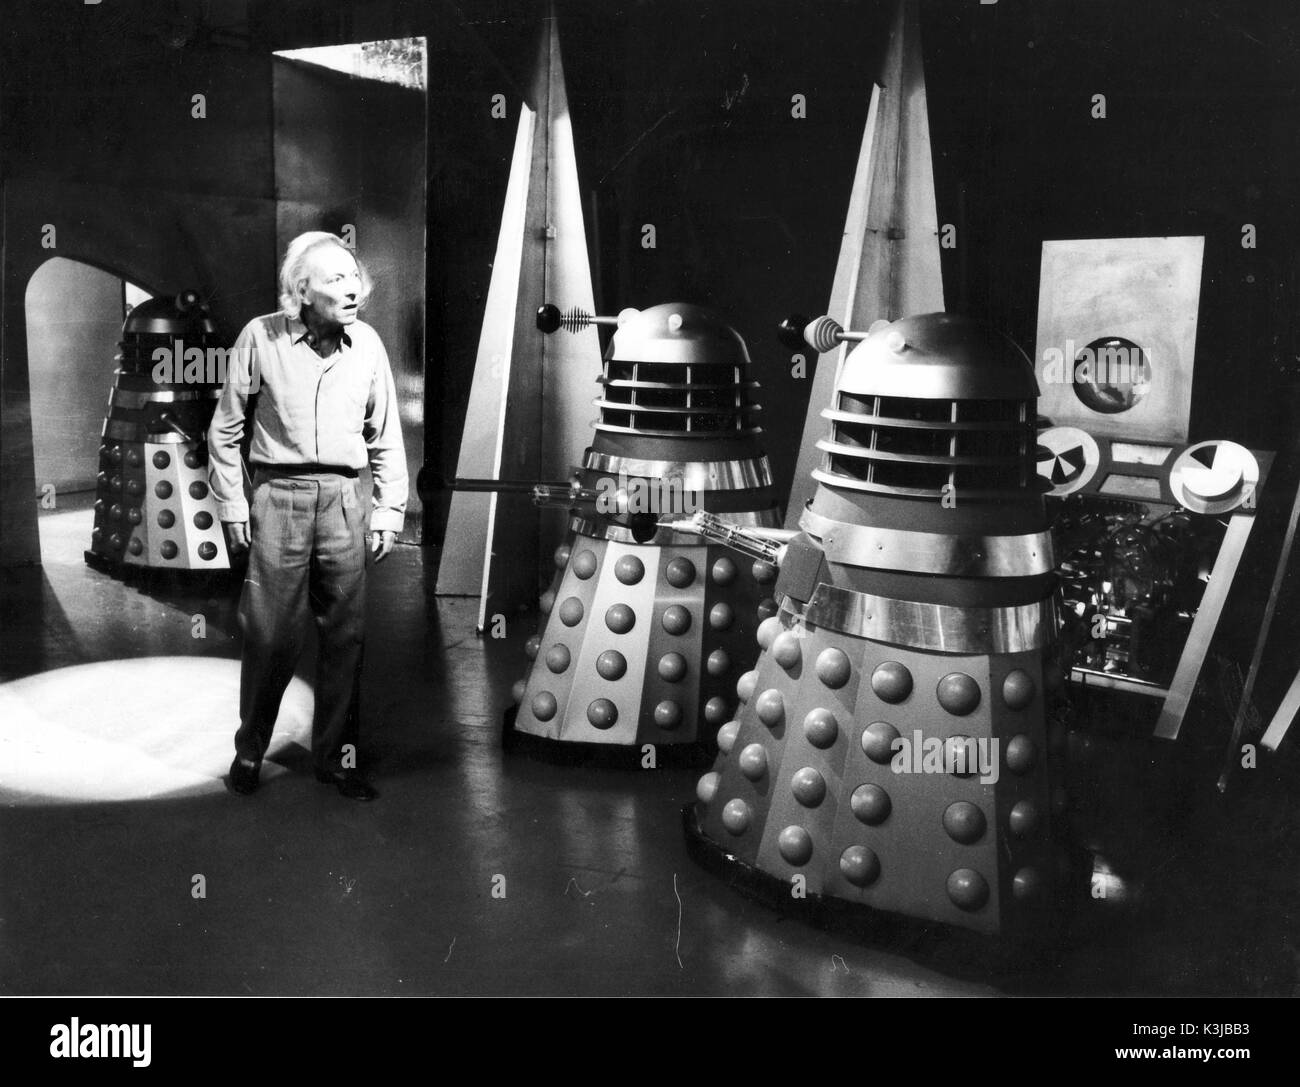 DOCTOR WHO [BR TV SERIES 1963 -] WILLIAM HARTNELL as the Doctor  'The Survivors' December, 28th 1963 The first appearance of the Daleks DOCTOR WHO Stock Photo